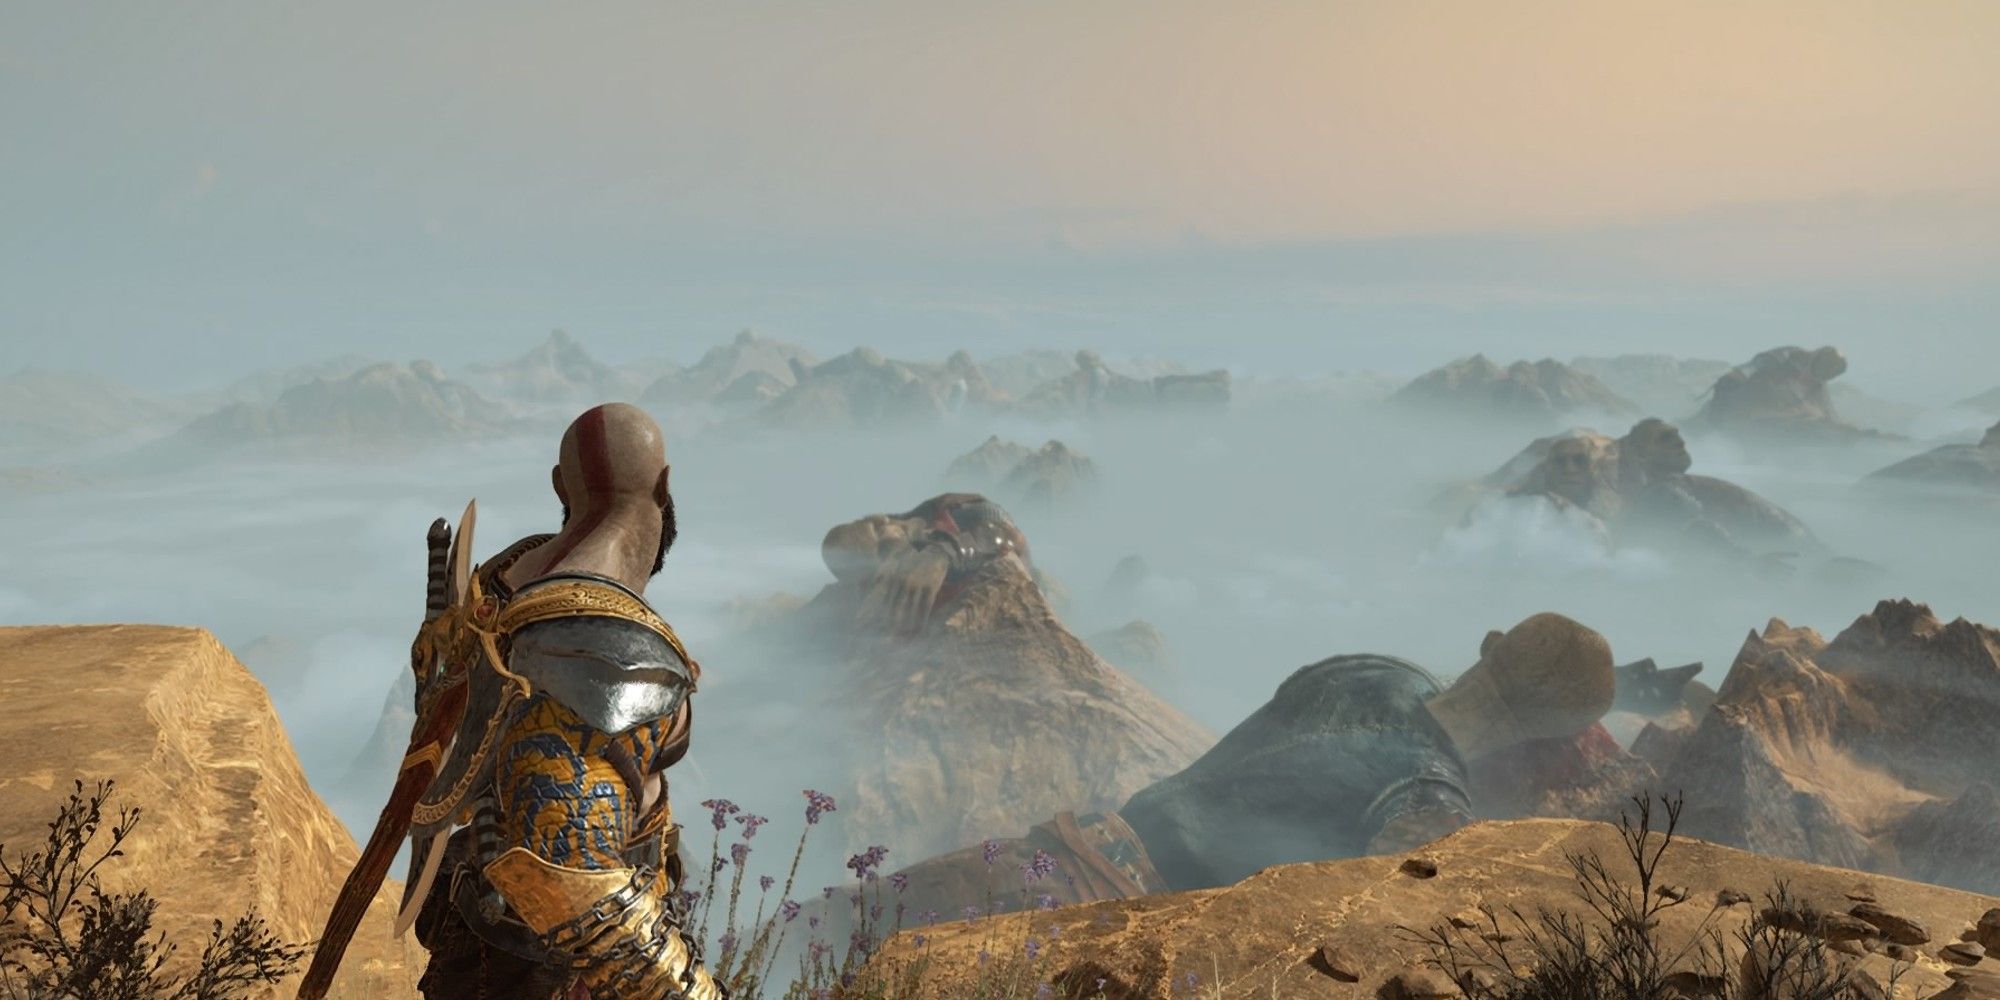 Kratos overlooking the valley of the dead, which his full of dead giants, in Jotunheim